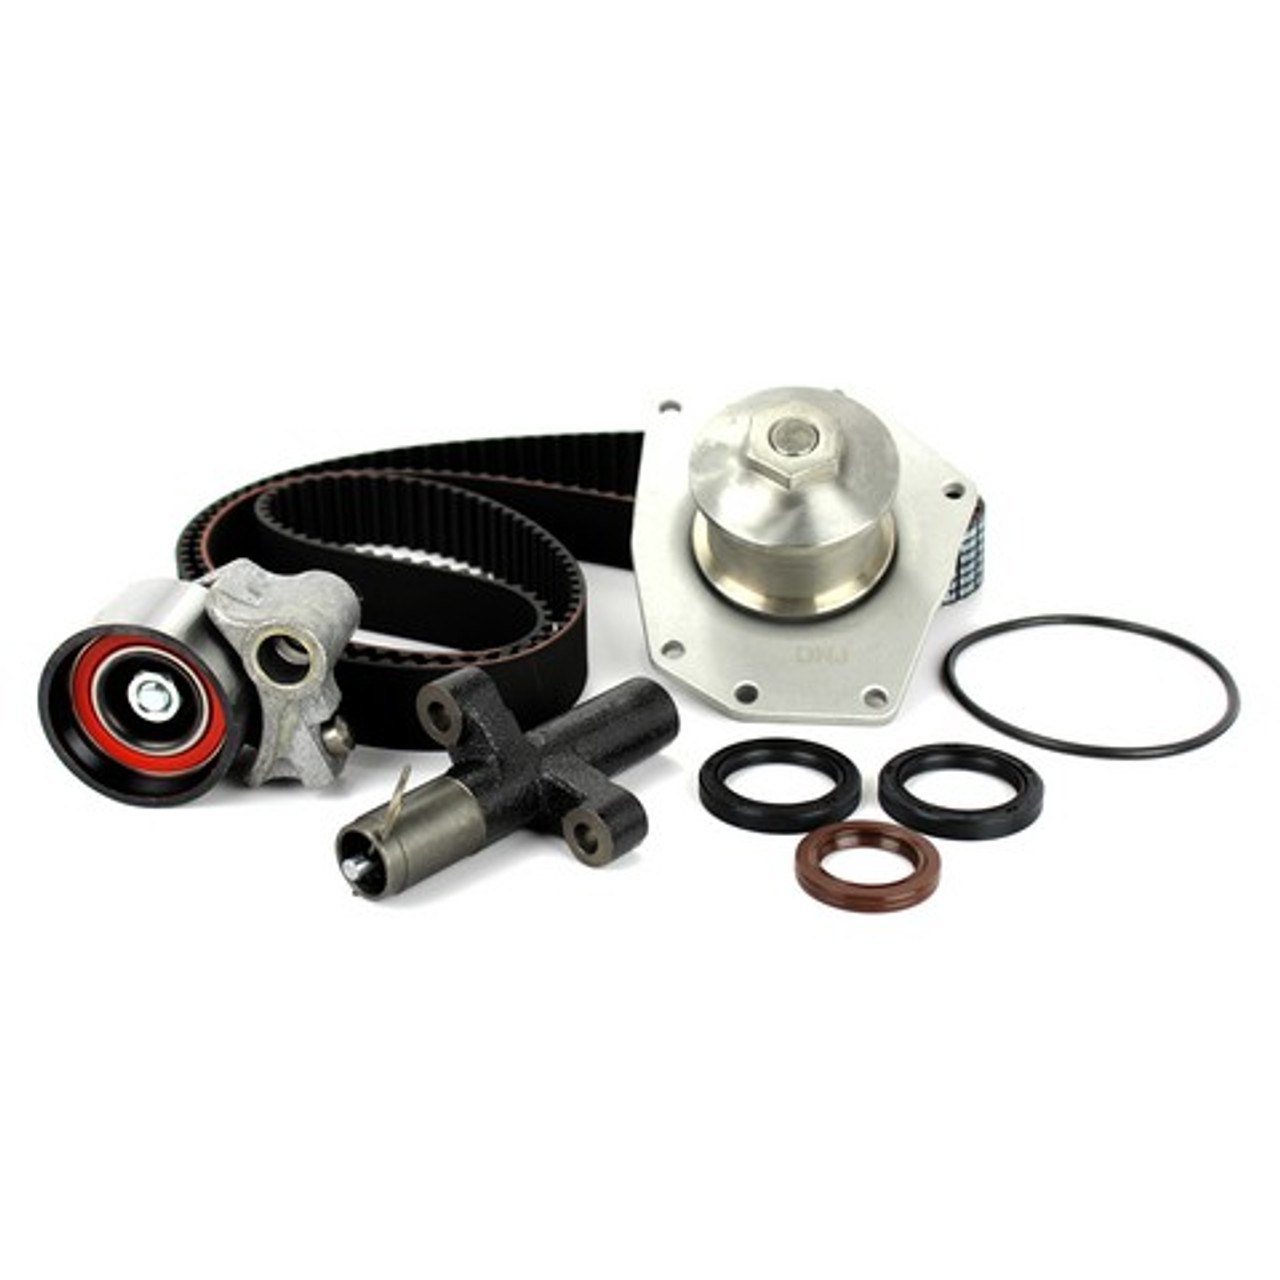 Timing Belt Kit with Water Pump 3.5L 1999 Chrysler LHS - TBK143WP.19